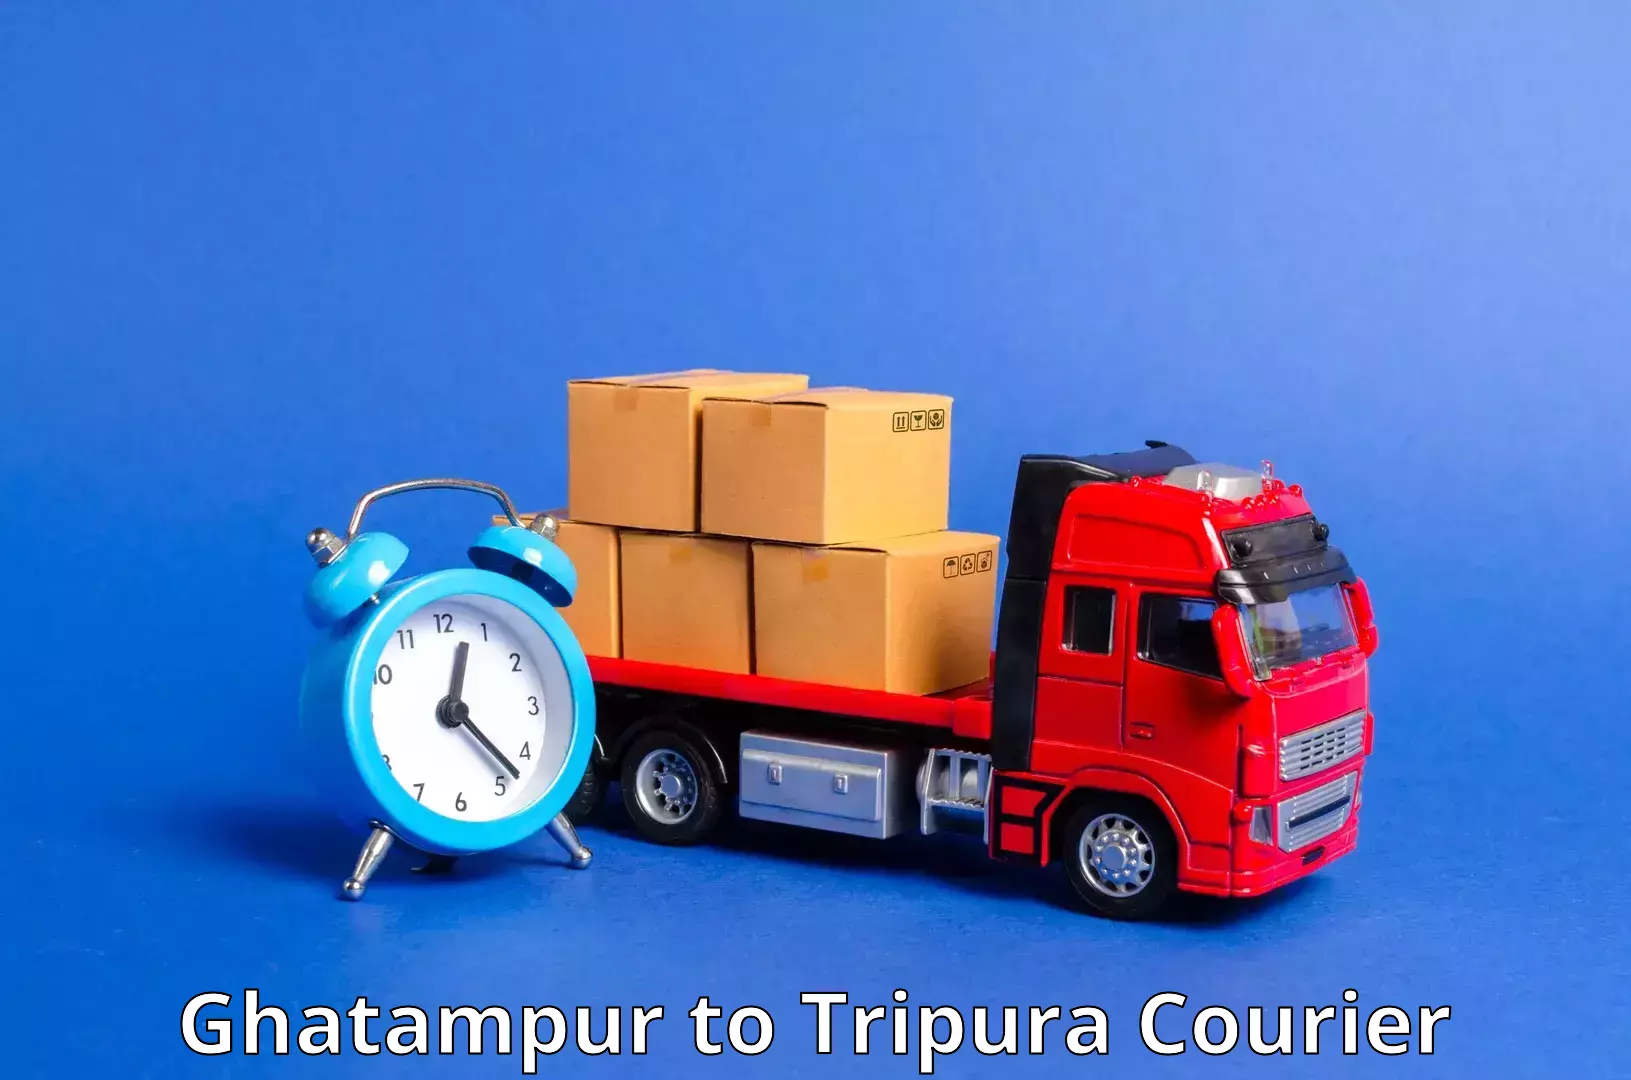 Discounted shipping Ghatampur to Udaipur Tripura